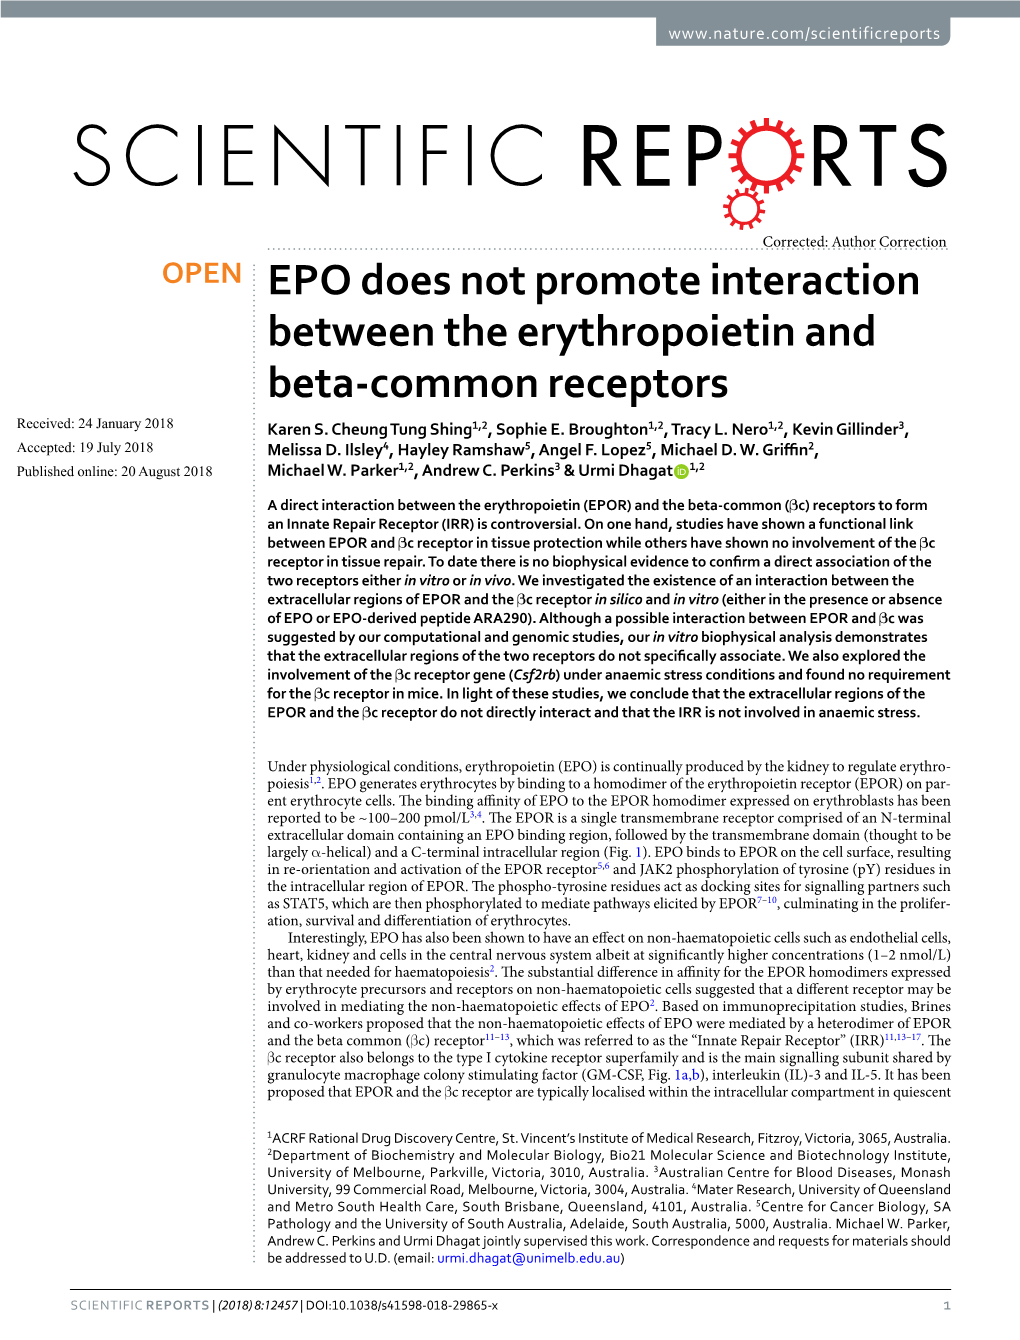 EPO Does Not Promote Interaction Between the Erythropoietin and Beta-Common Receptors Received: 24 January 2018 Karen S